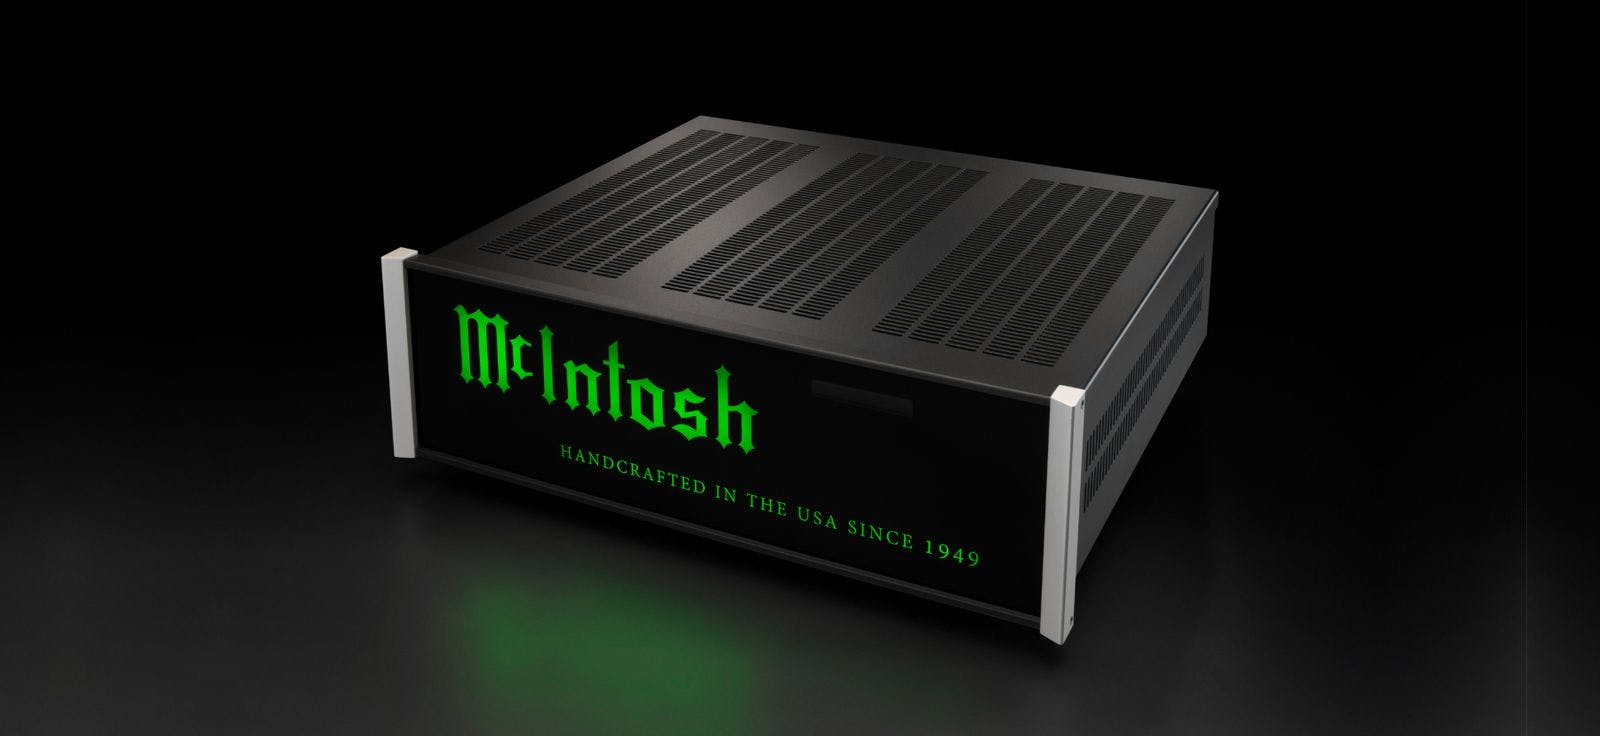 McIntosh has just launched the LB200, a new version of their popular Light Box